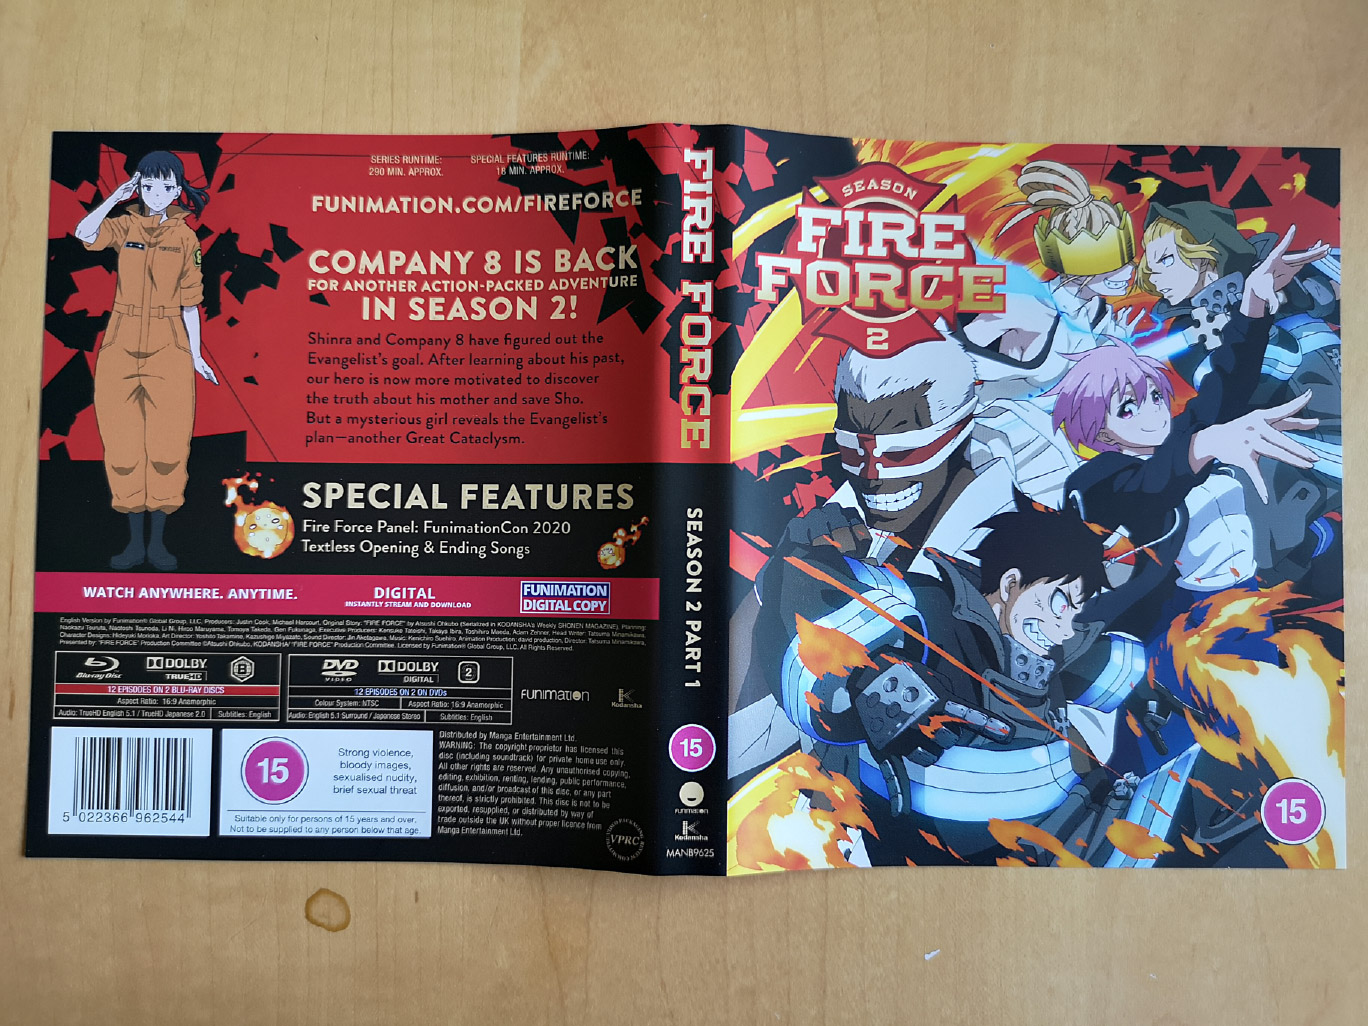  Fire Force: Season 2 - Part 2 - Limited Edition Blu-ray + DVD +  Digital : Various, Various: Movies & TV